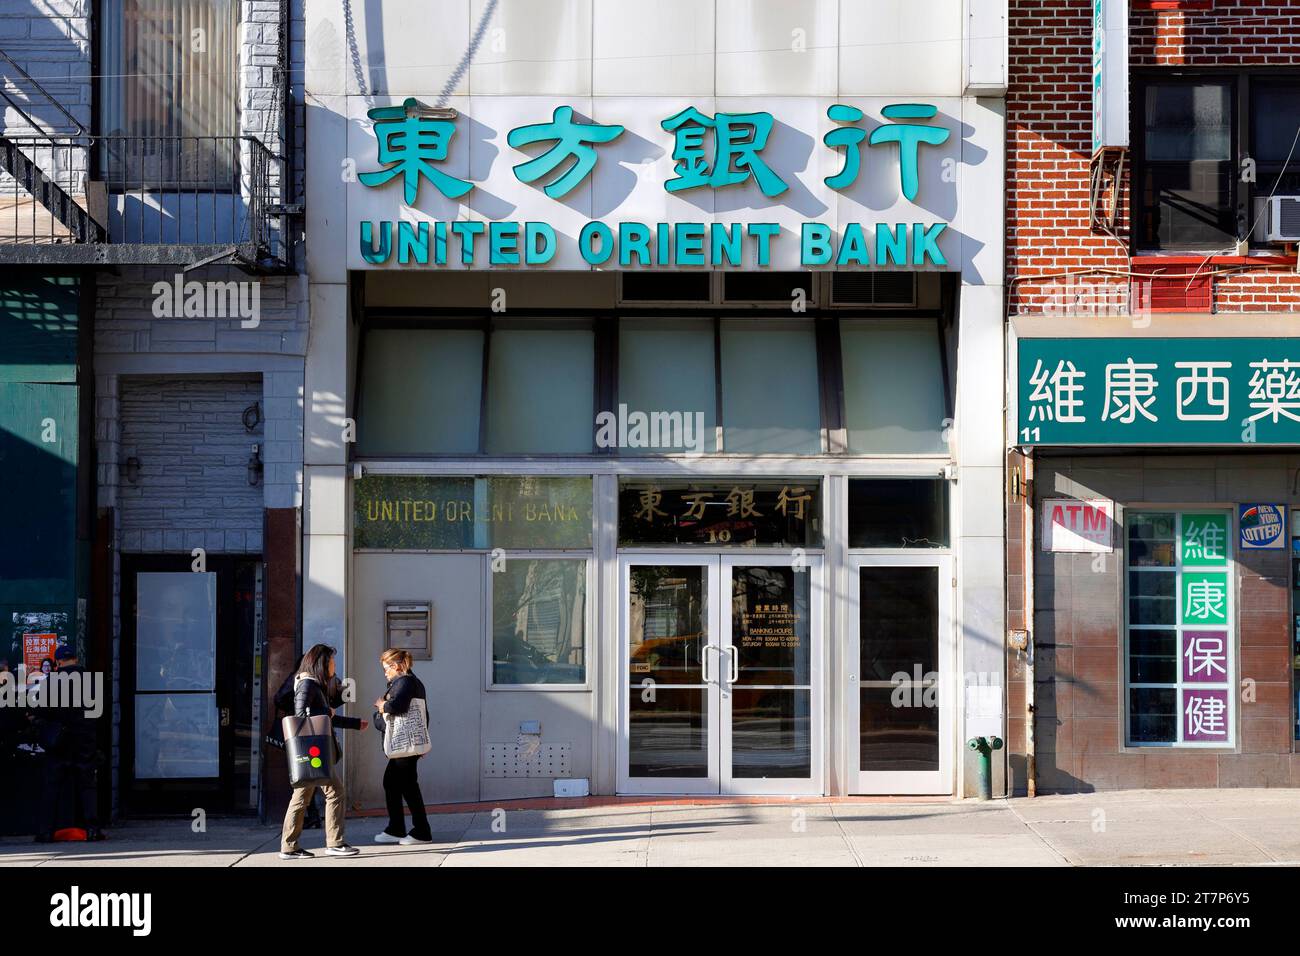 United Orient Bank 東方銀行, 10 Chatham Sq, New York, NYC storefront photo of a Chinese American bank in Manhattan Chinatown. Stock Photo